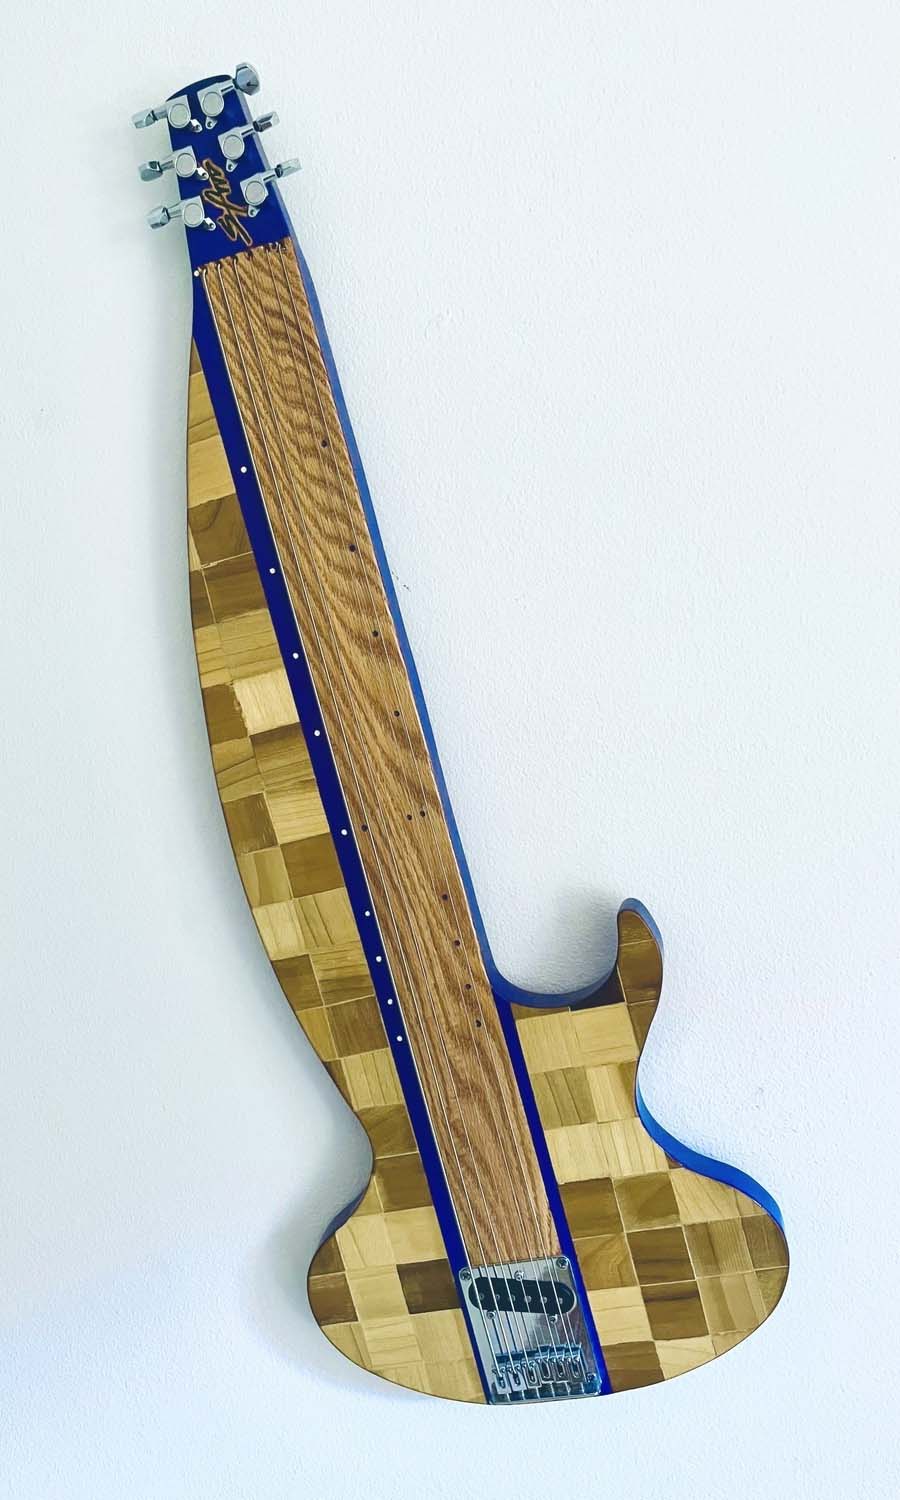 Horns, Strings, and Sculpture: Luthiery and Art by Scott F. Hall